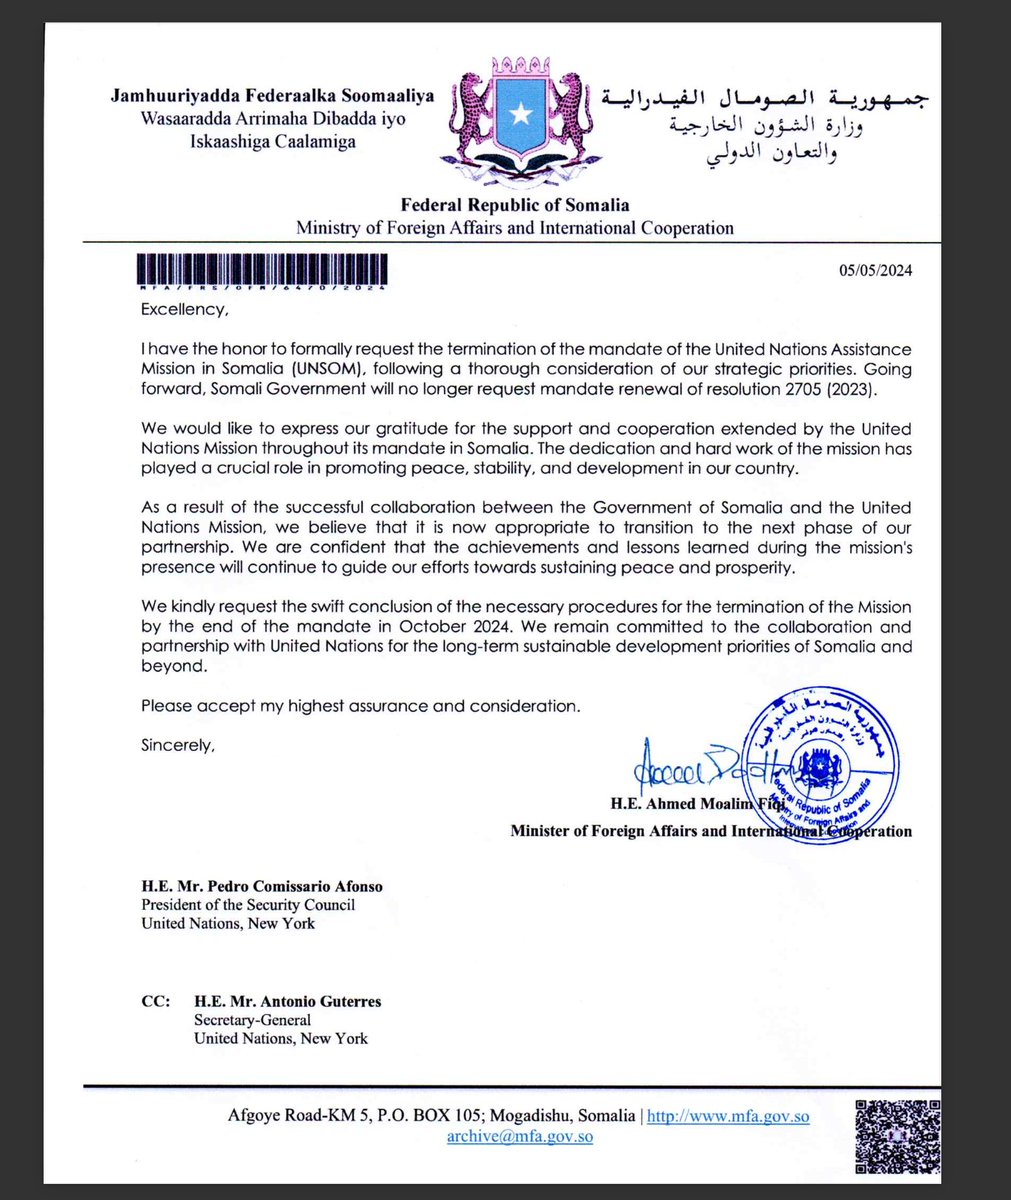 #CONFIRMED In a bombshell, Somalia asks UNSC to terminate UN Somalia Mission. Move comes hot on heels of recent news UN Rep @CatrionaLaing1 leaving her post prematurely. Pro-regime activists greeted news of Ms Laing's early exit with glee, heaping personal insults on her.